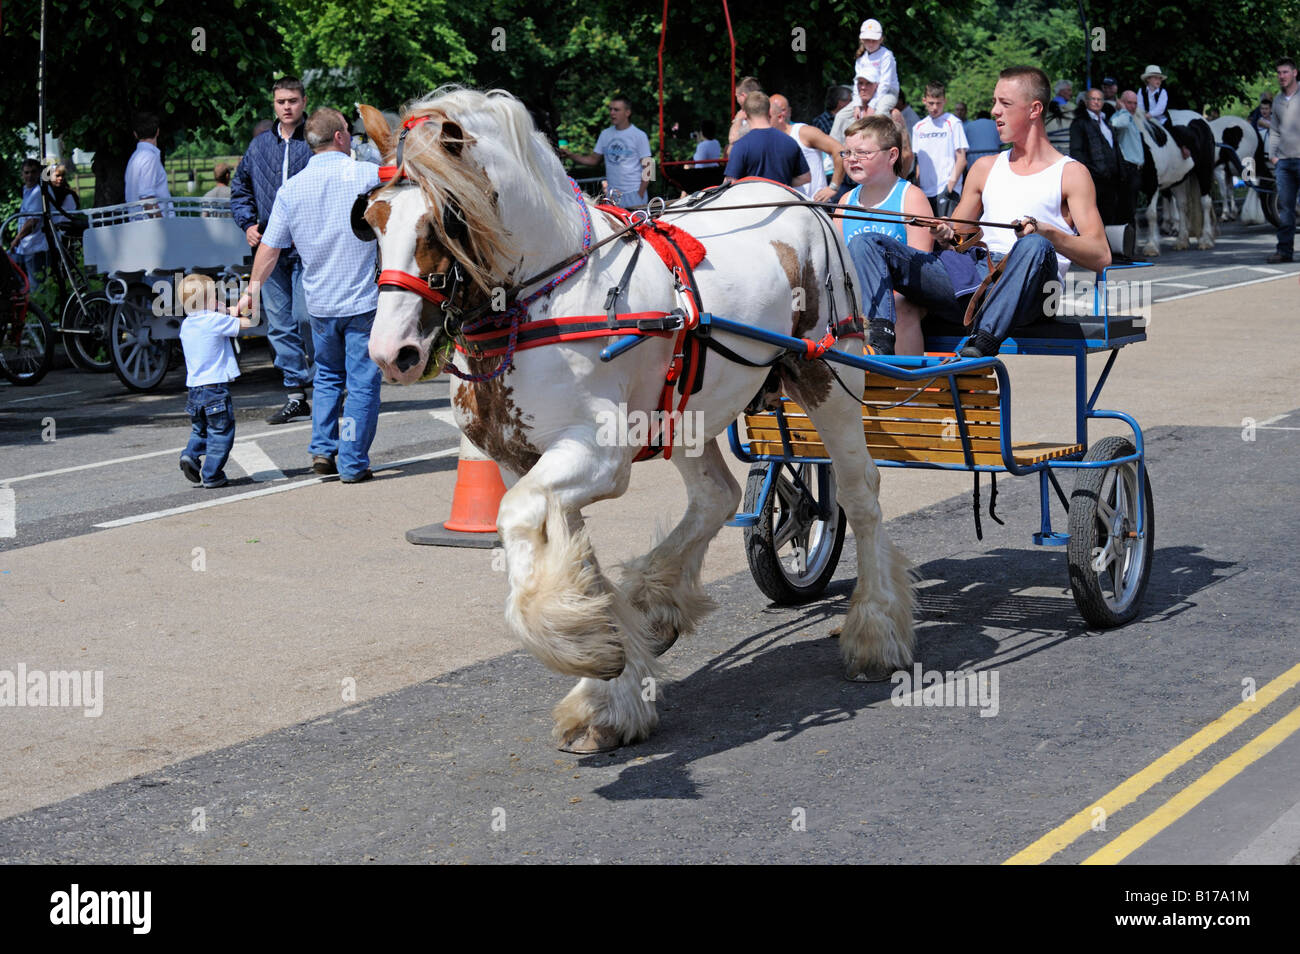 Gypsy travellers with trotting horse and trap, Appleby Horse Fair. Appleby-in-Westmorland, Cumbria, England, United Kingdom. Stock Photo